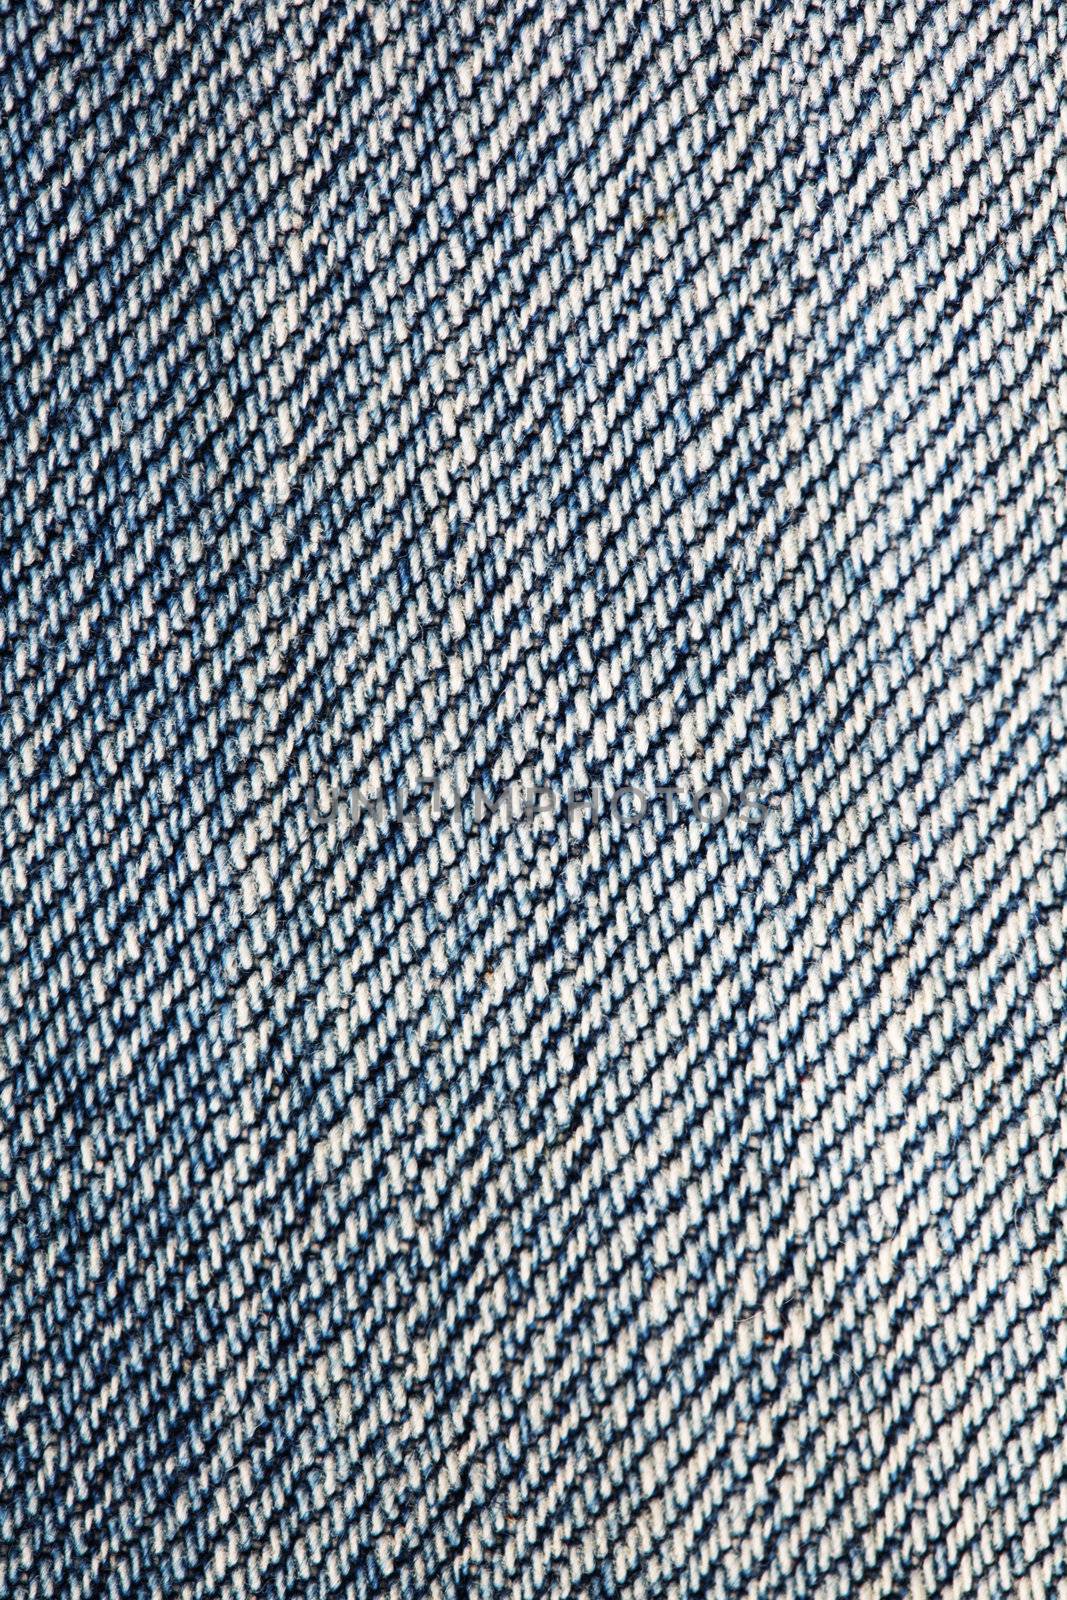 jeans fabric macro close up background 